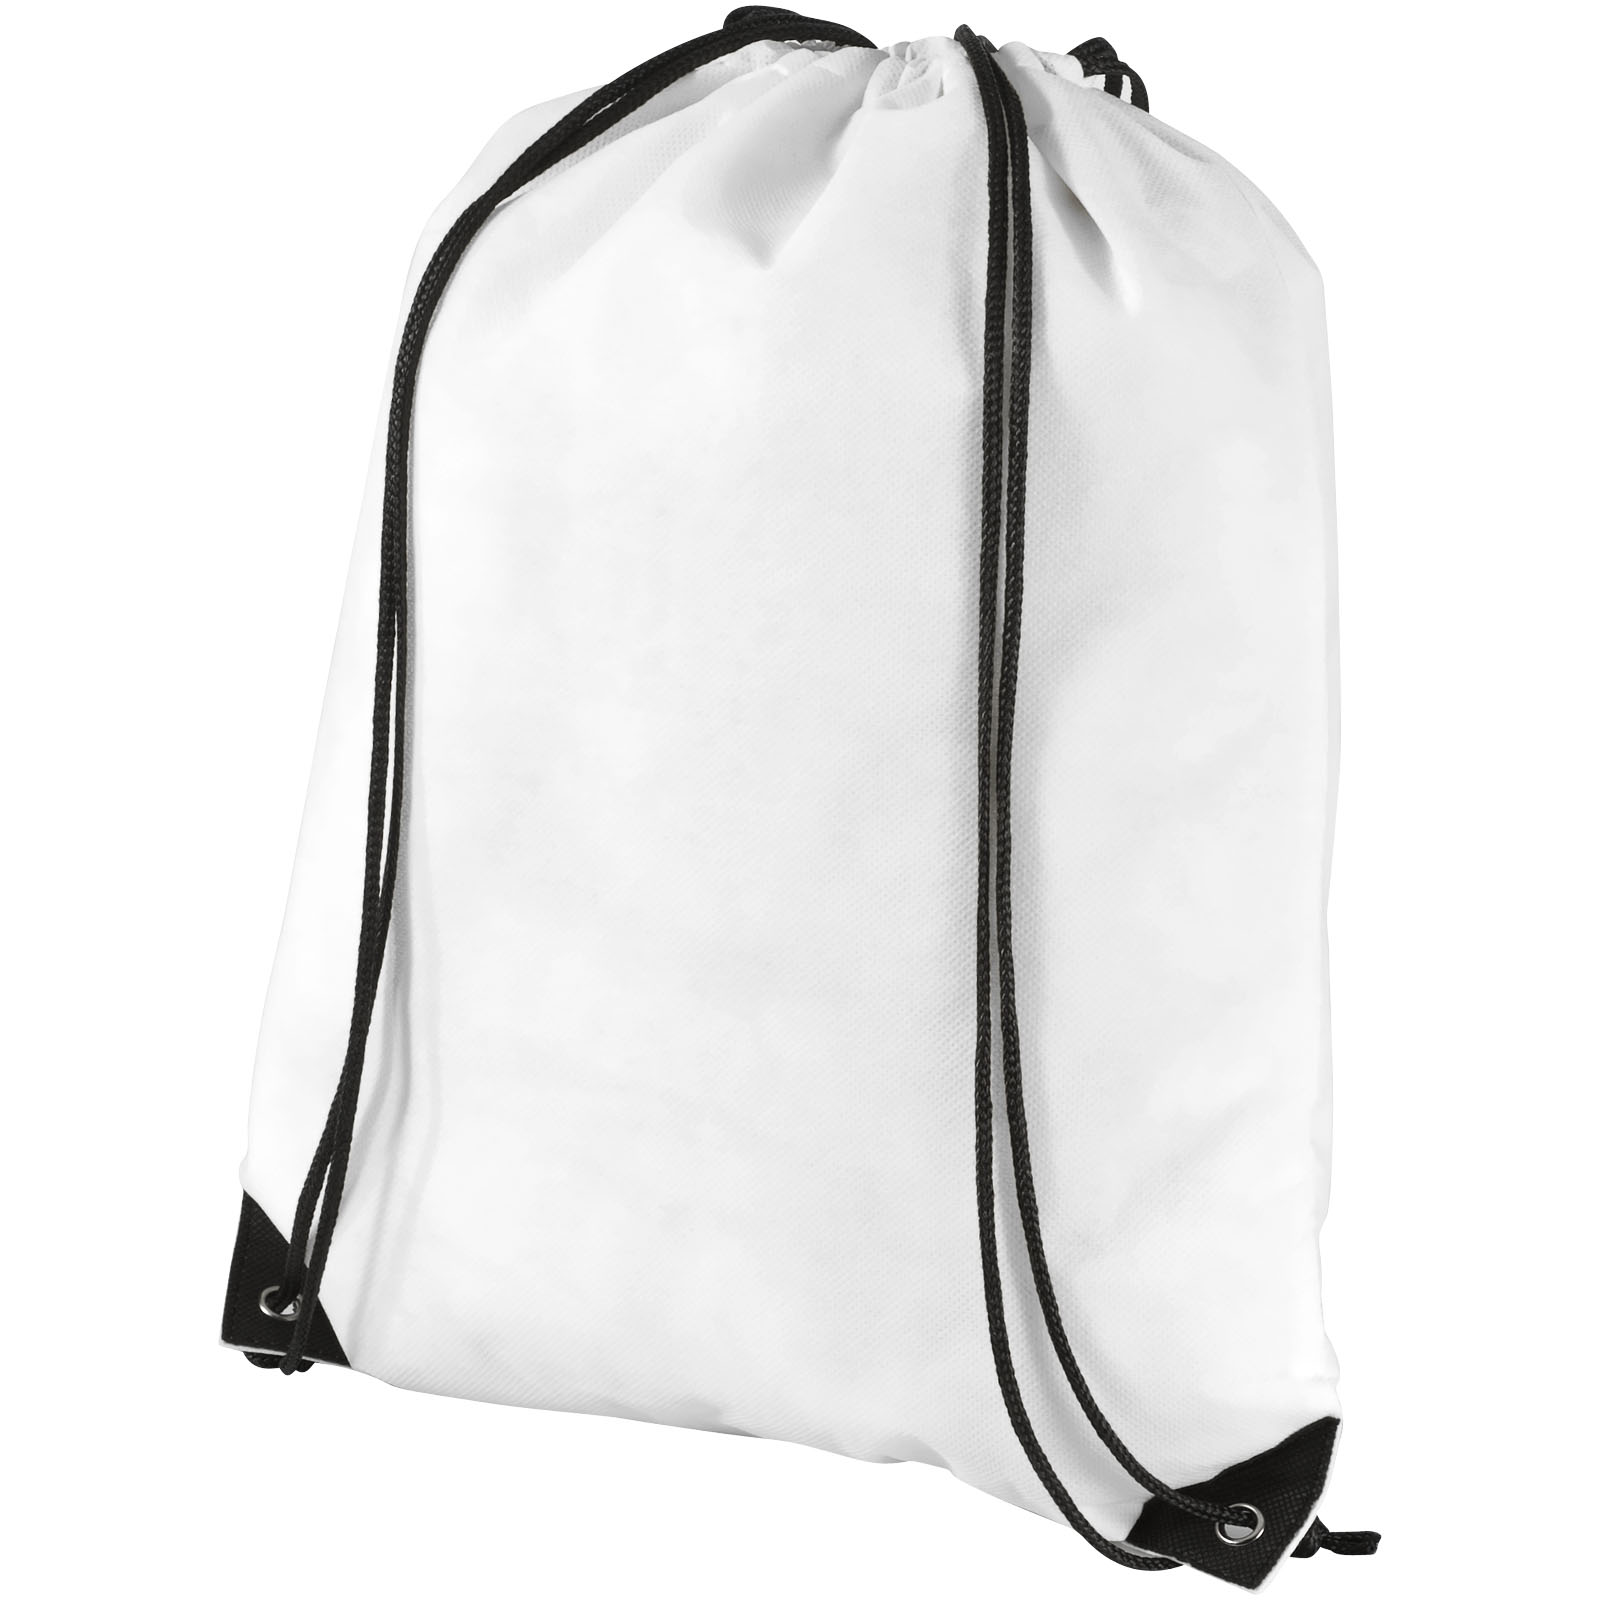 Bags - Evergreen non-woven drawstring backpack 5L